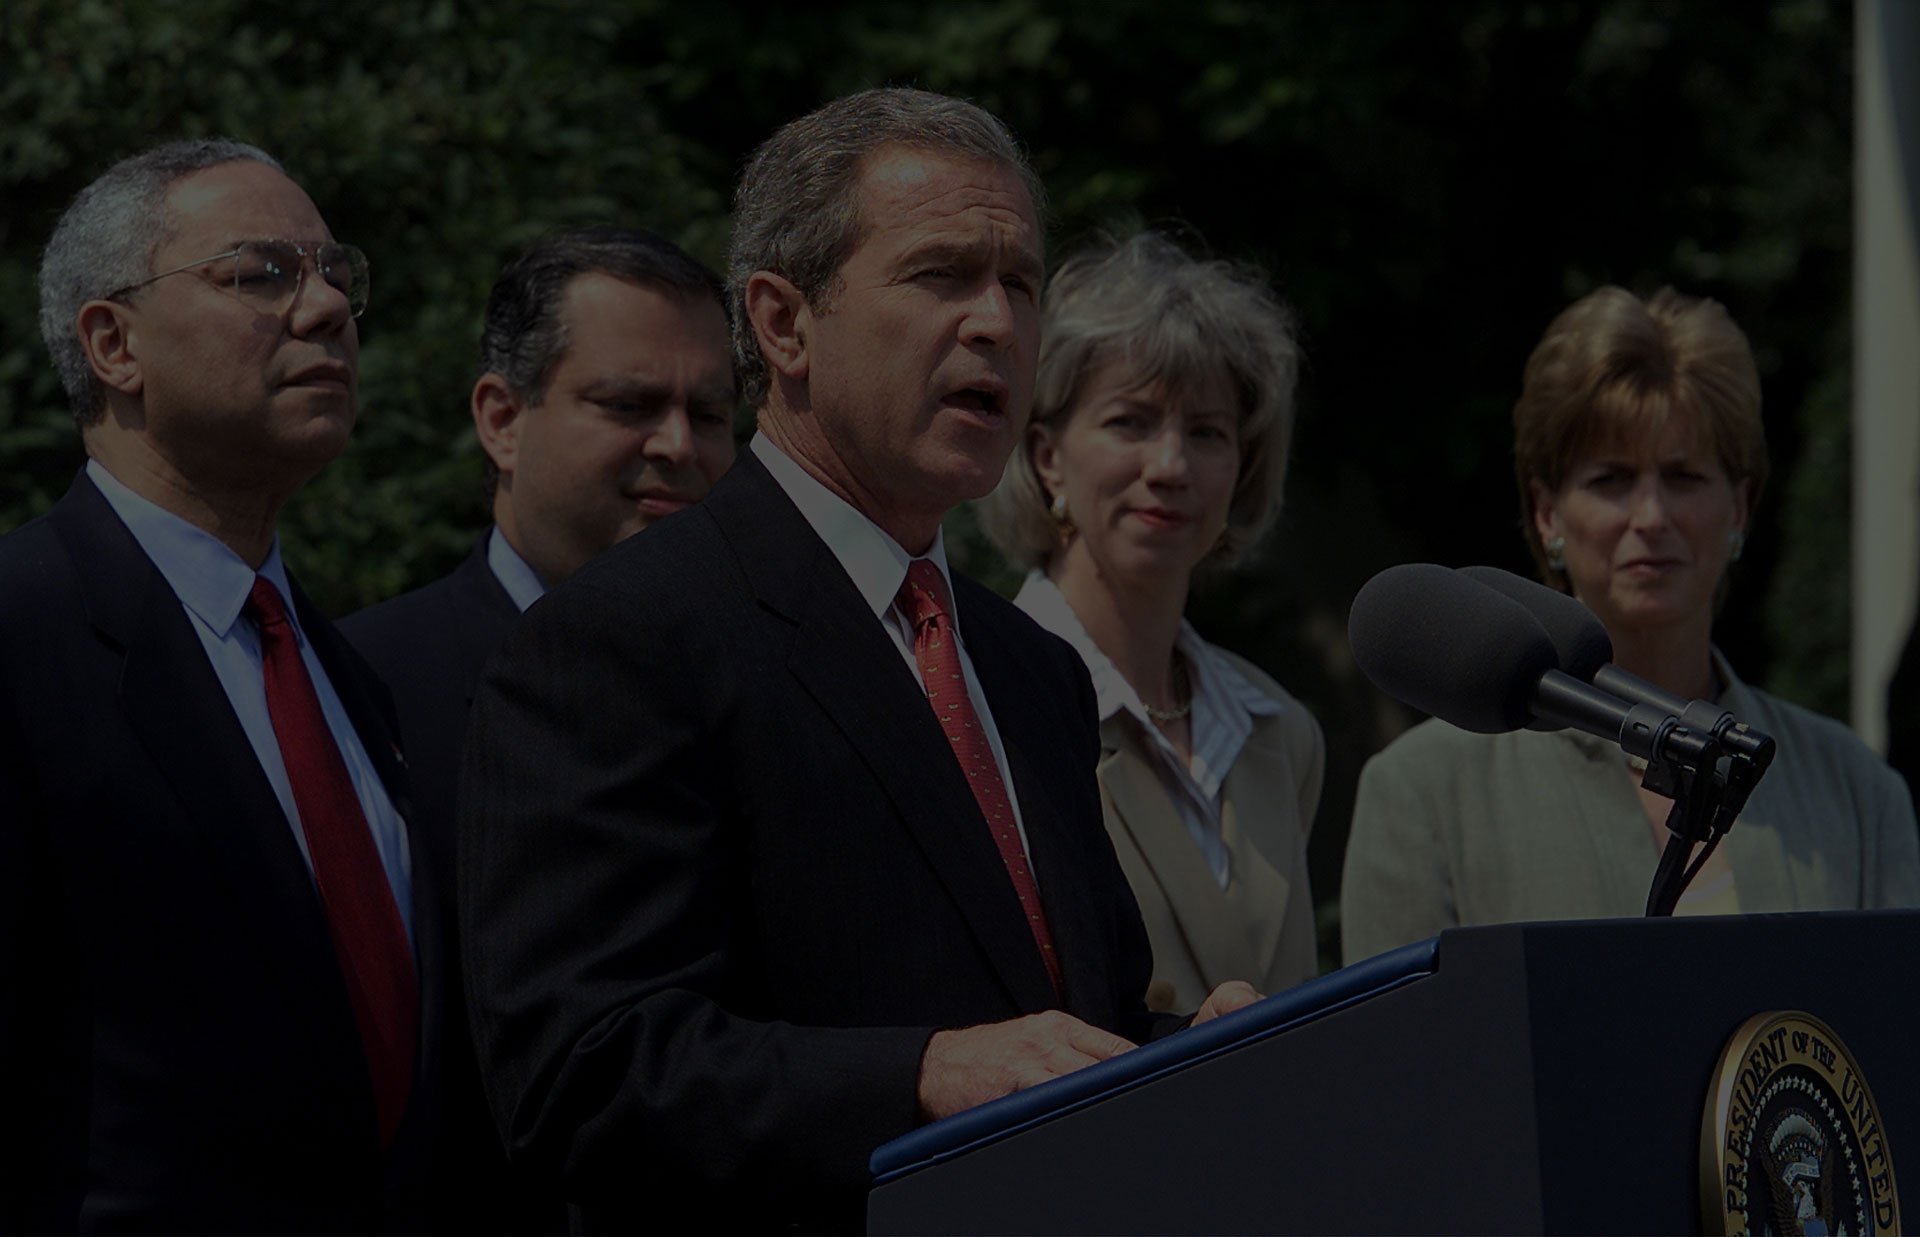 In a Rose Garden ceremony at the White House in 2001, President George W. Bush made remarks on the global climate change working group's status report in preparation for the US-EU summit. Surrounded by his cabinet, including Secretary of State Colin Powell (left), Secretary of Energy Spencer Abraham (second from left), Secretary of Interior Gale Norton (second from right) and EPA administrator Christine Todd Whitman (right), Bush reiterated his opposition to the Kyoto climate change treaty but vowed to continue working within the U.N. process.